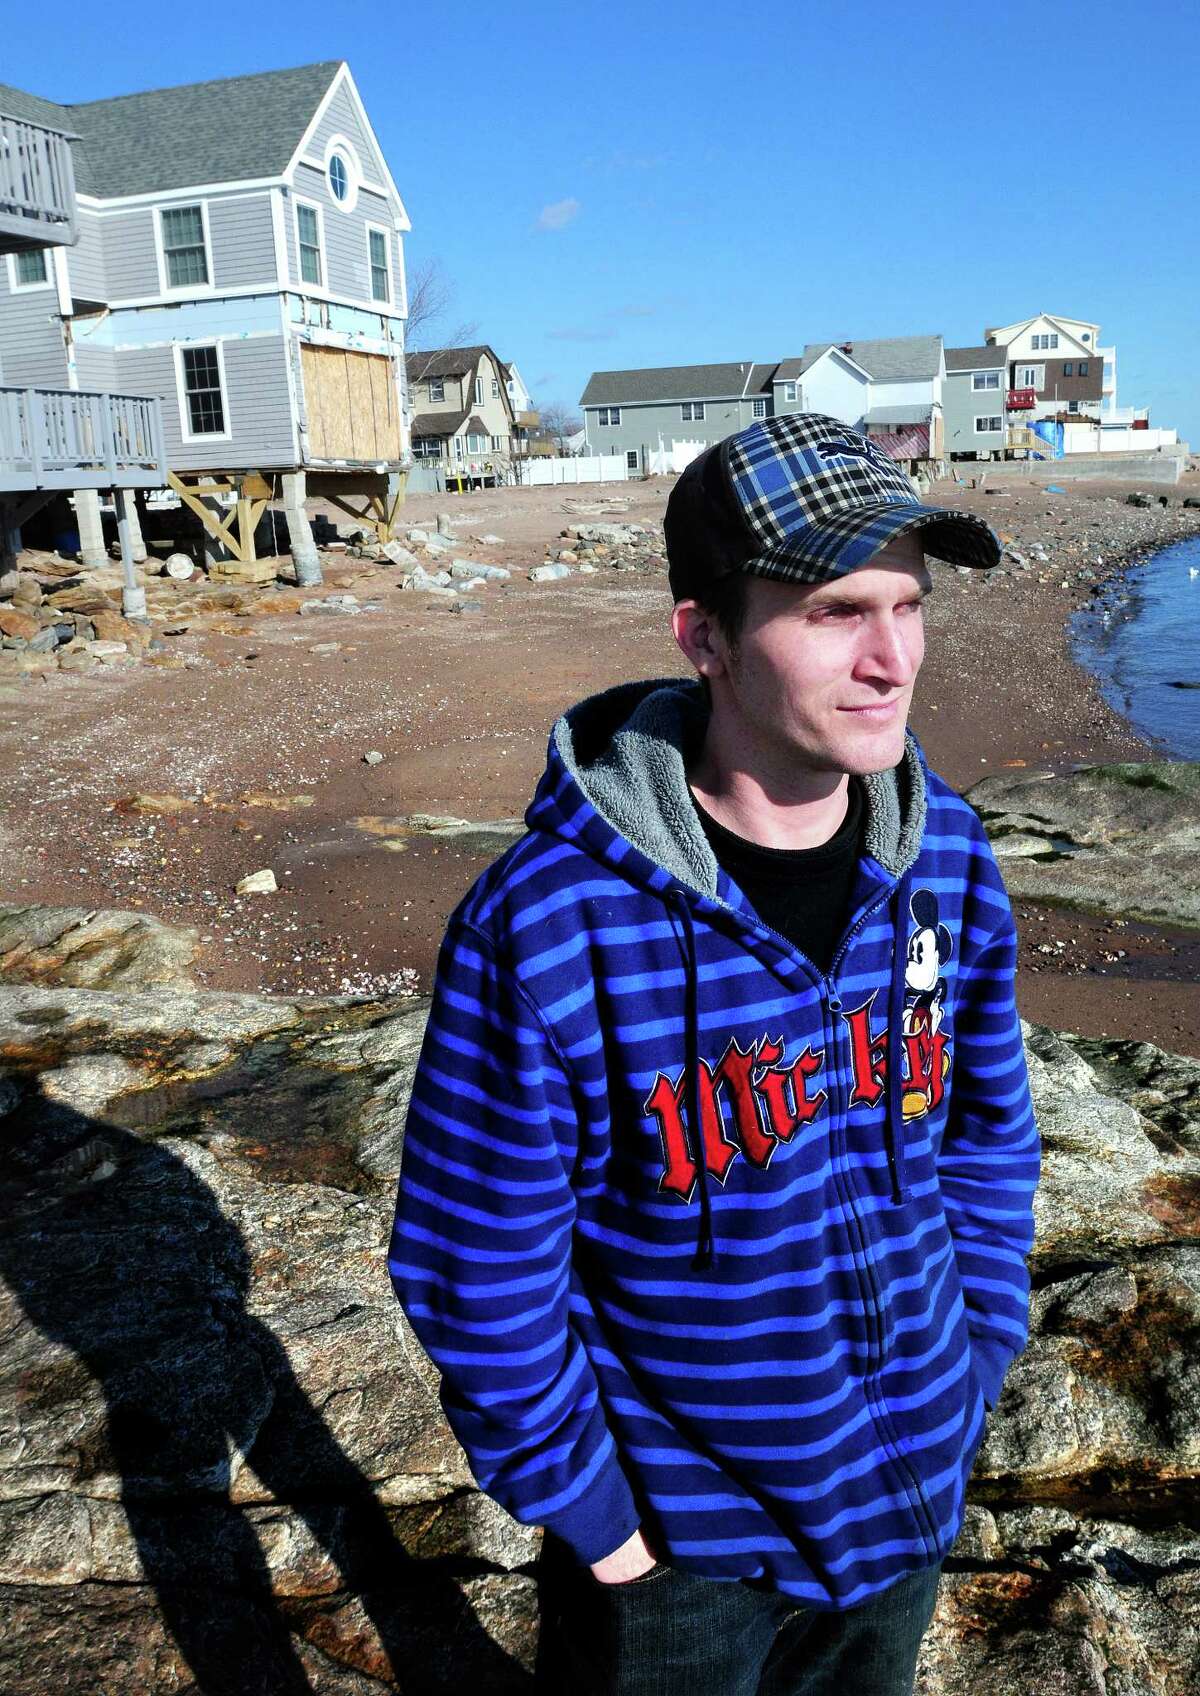 Shawn Hopkinson of East Haven is photographed at Cosey Beach in East Haven on 2/7/2012 where he had set up the relief organization, People Helping People, after Hurricane Irene. Photo by Arnold Gold/New Haven Register AG0438C